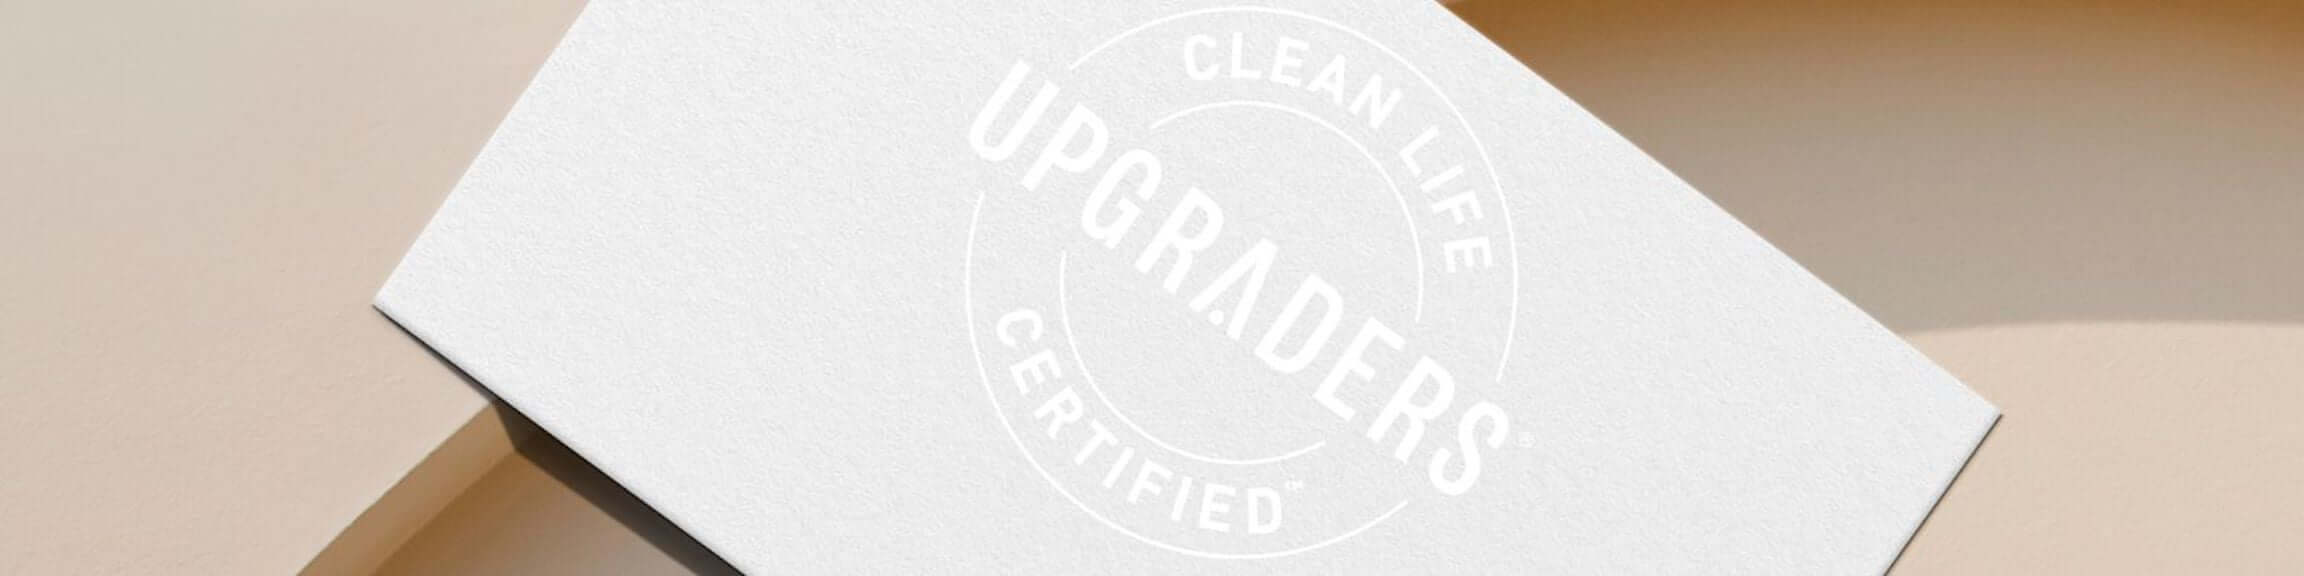 Upgraders Clean Life Certified business card